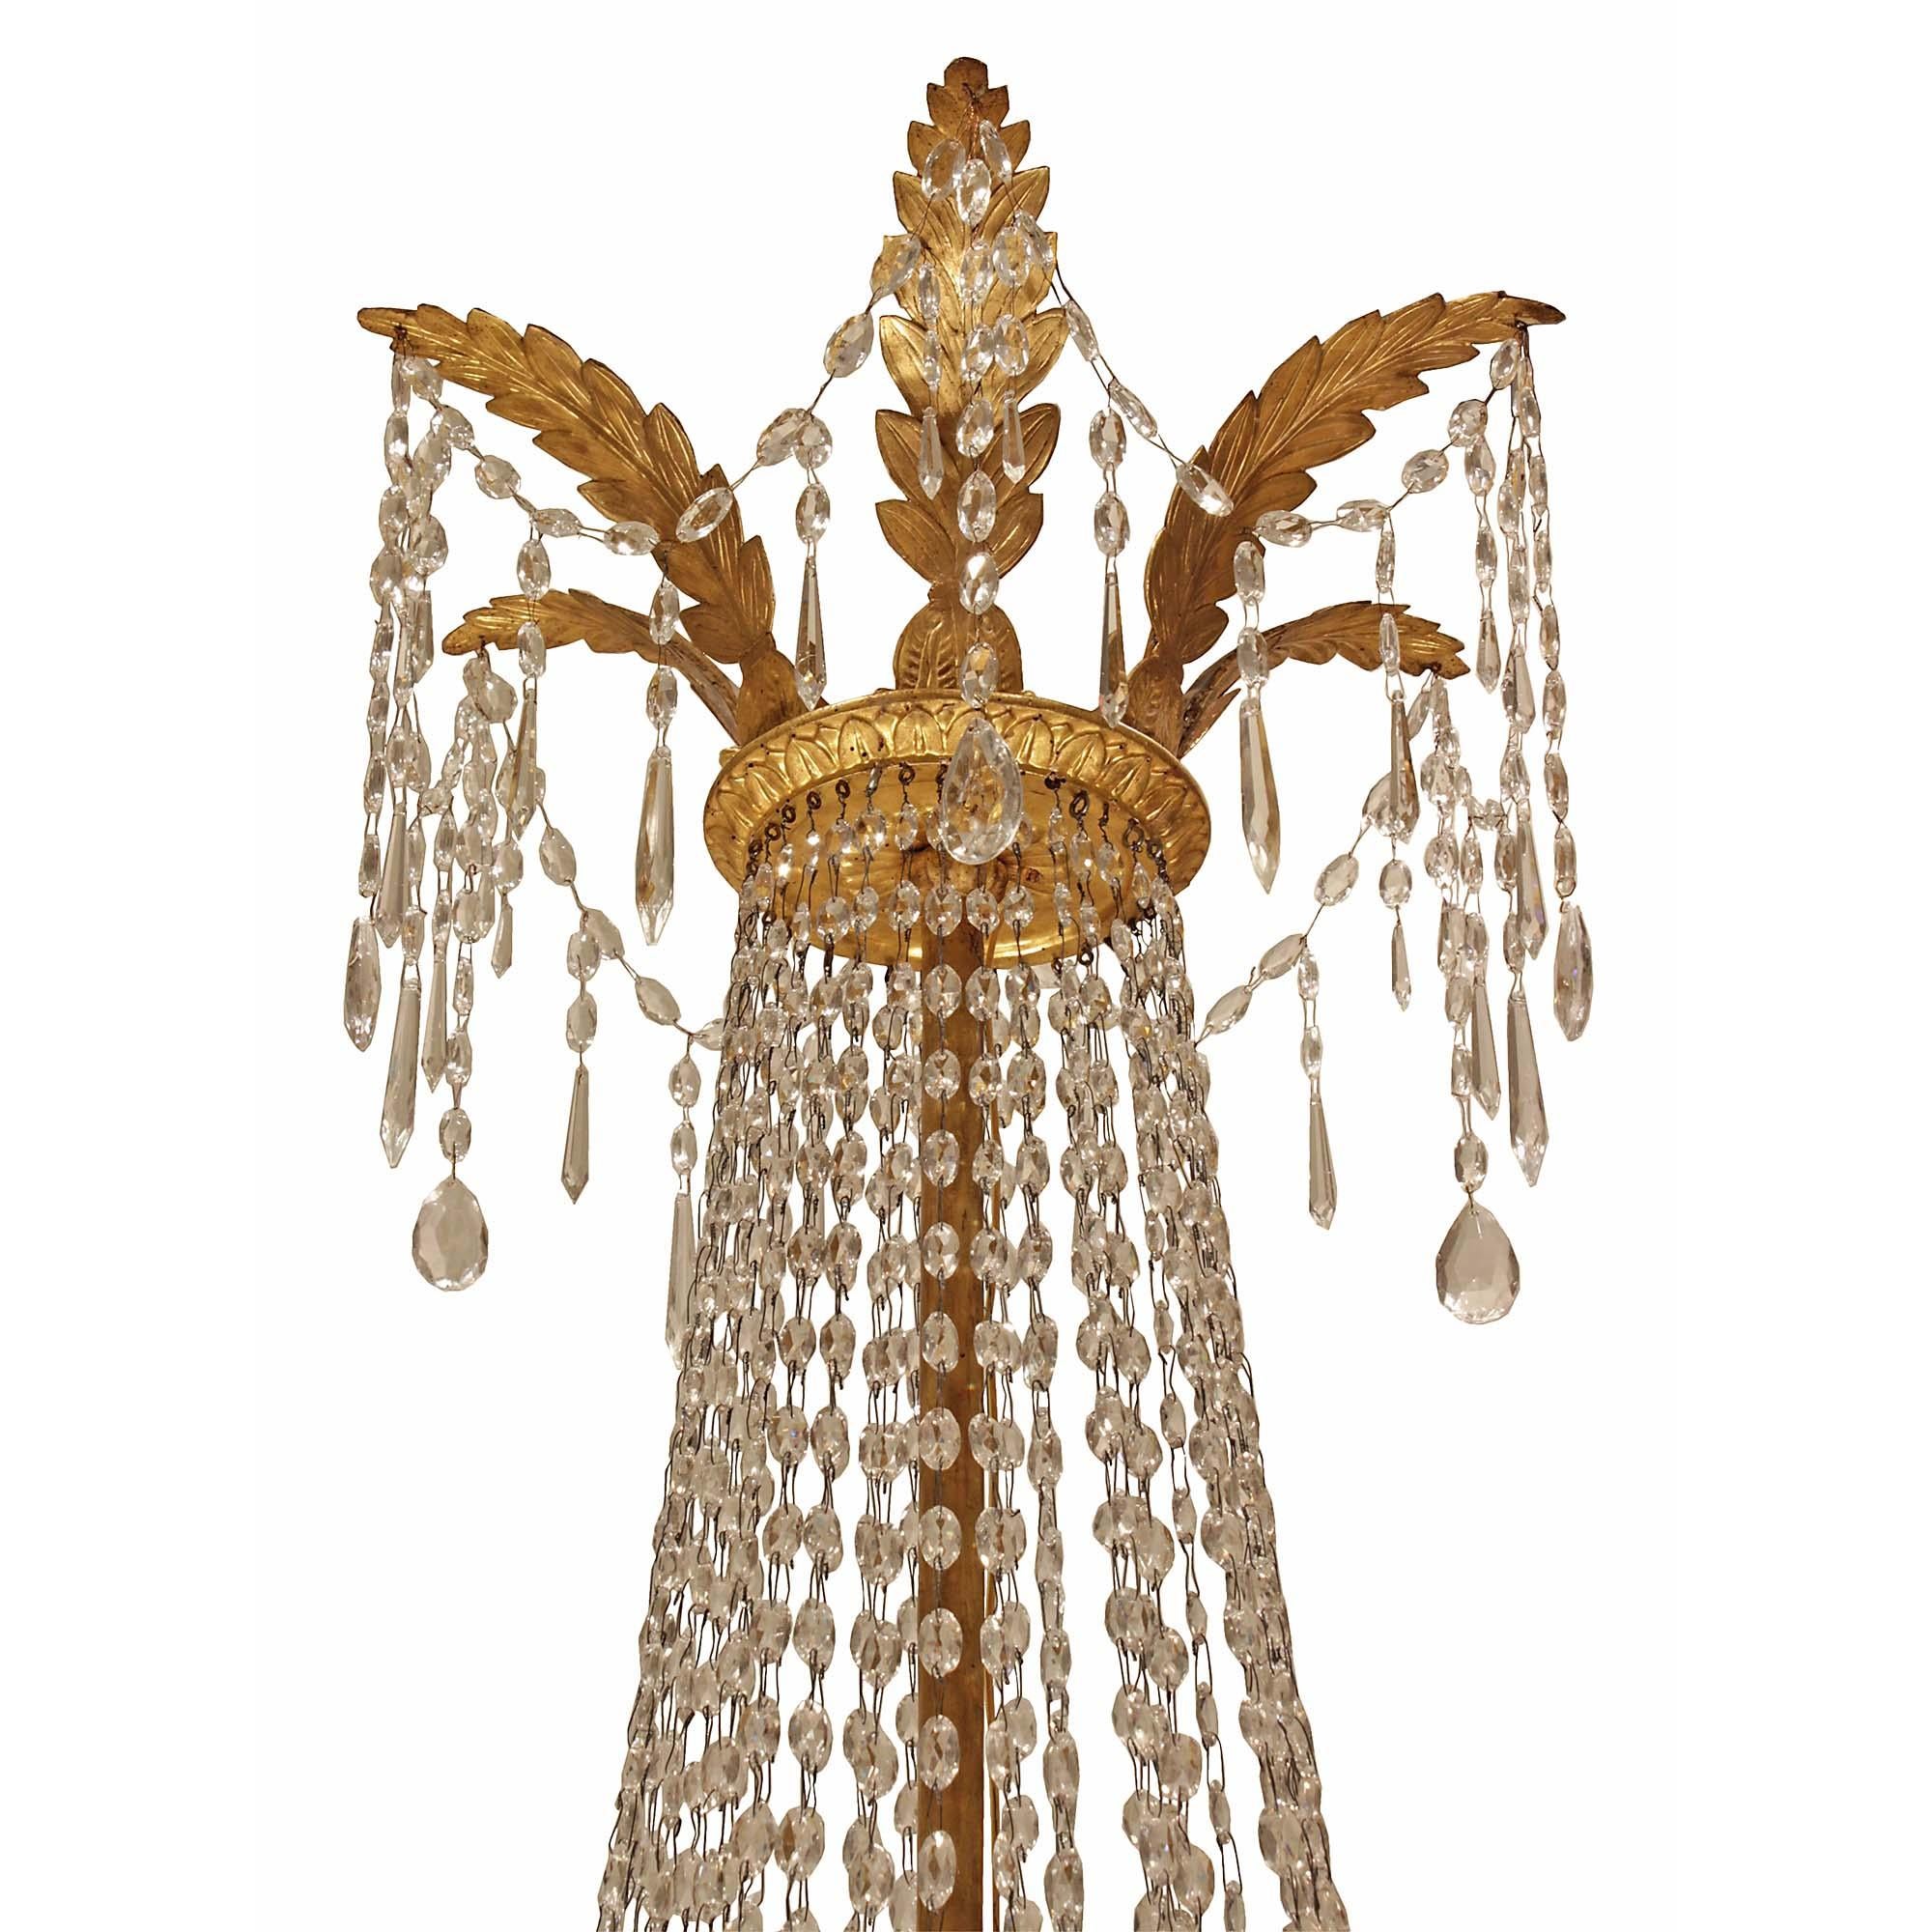 A unique and elegant Italian 18th century Louis XVI period gilt wood twelve light chandelier. This lovely air balloon shaped chandelier has a carved inverted bottom finial with garlands connecting to the central base. The circular base is decorated